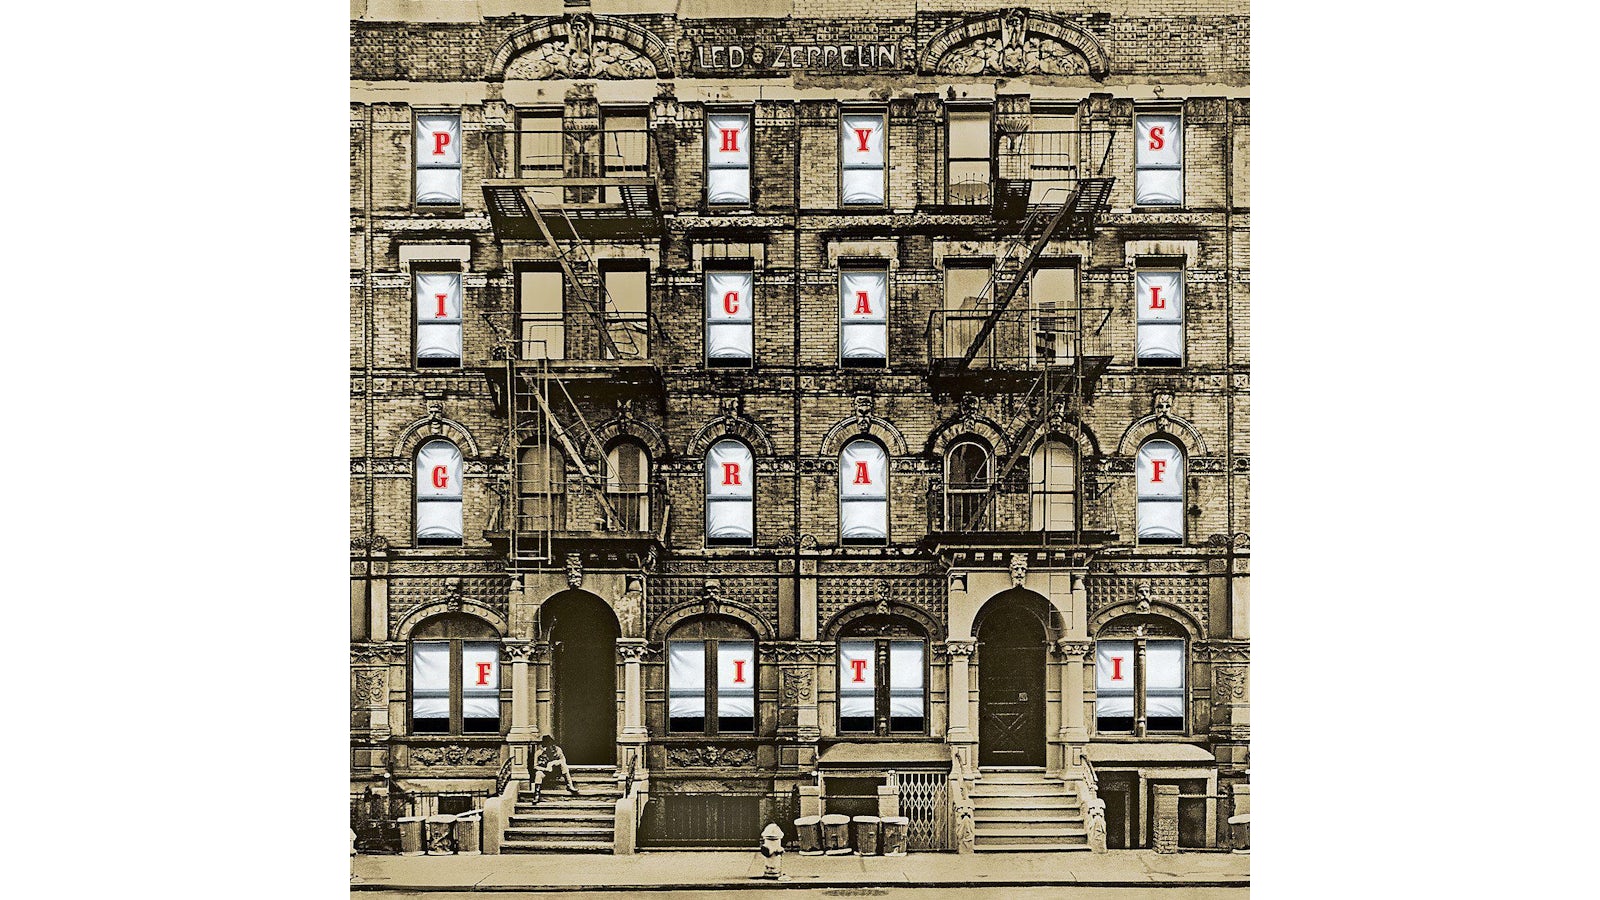 Led zeppelin physical. Лед Зеппелин physical Graffiti. Led Zeppelin 1975. Led Zeppelin - physical Graffiti (1975) LP. Led Zeppelin physical Graffiti обложка.